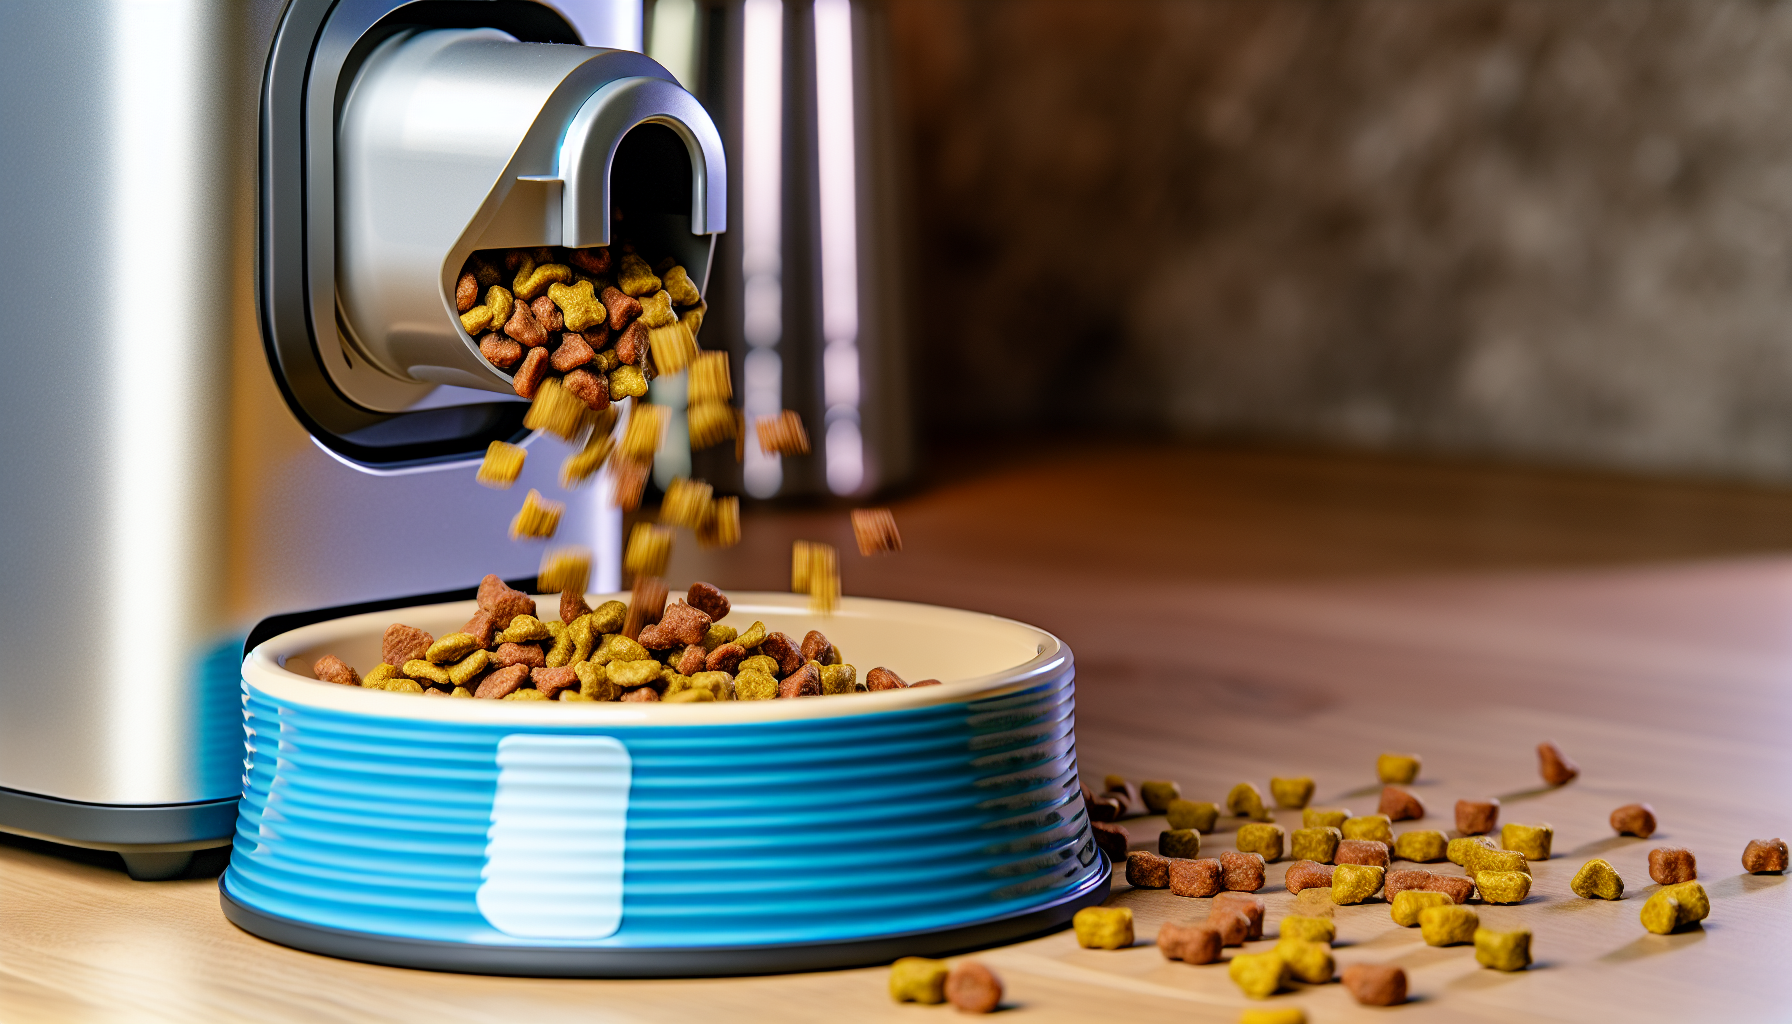 Automatic feeder dispensing food into a pet's bowl